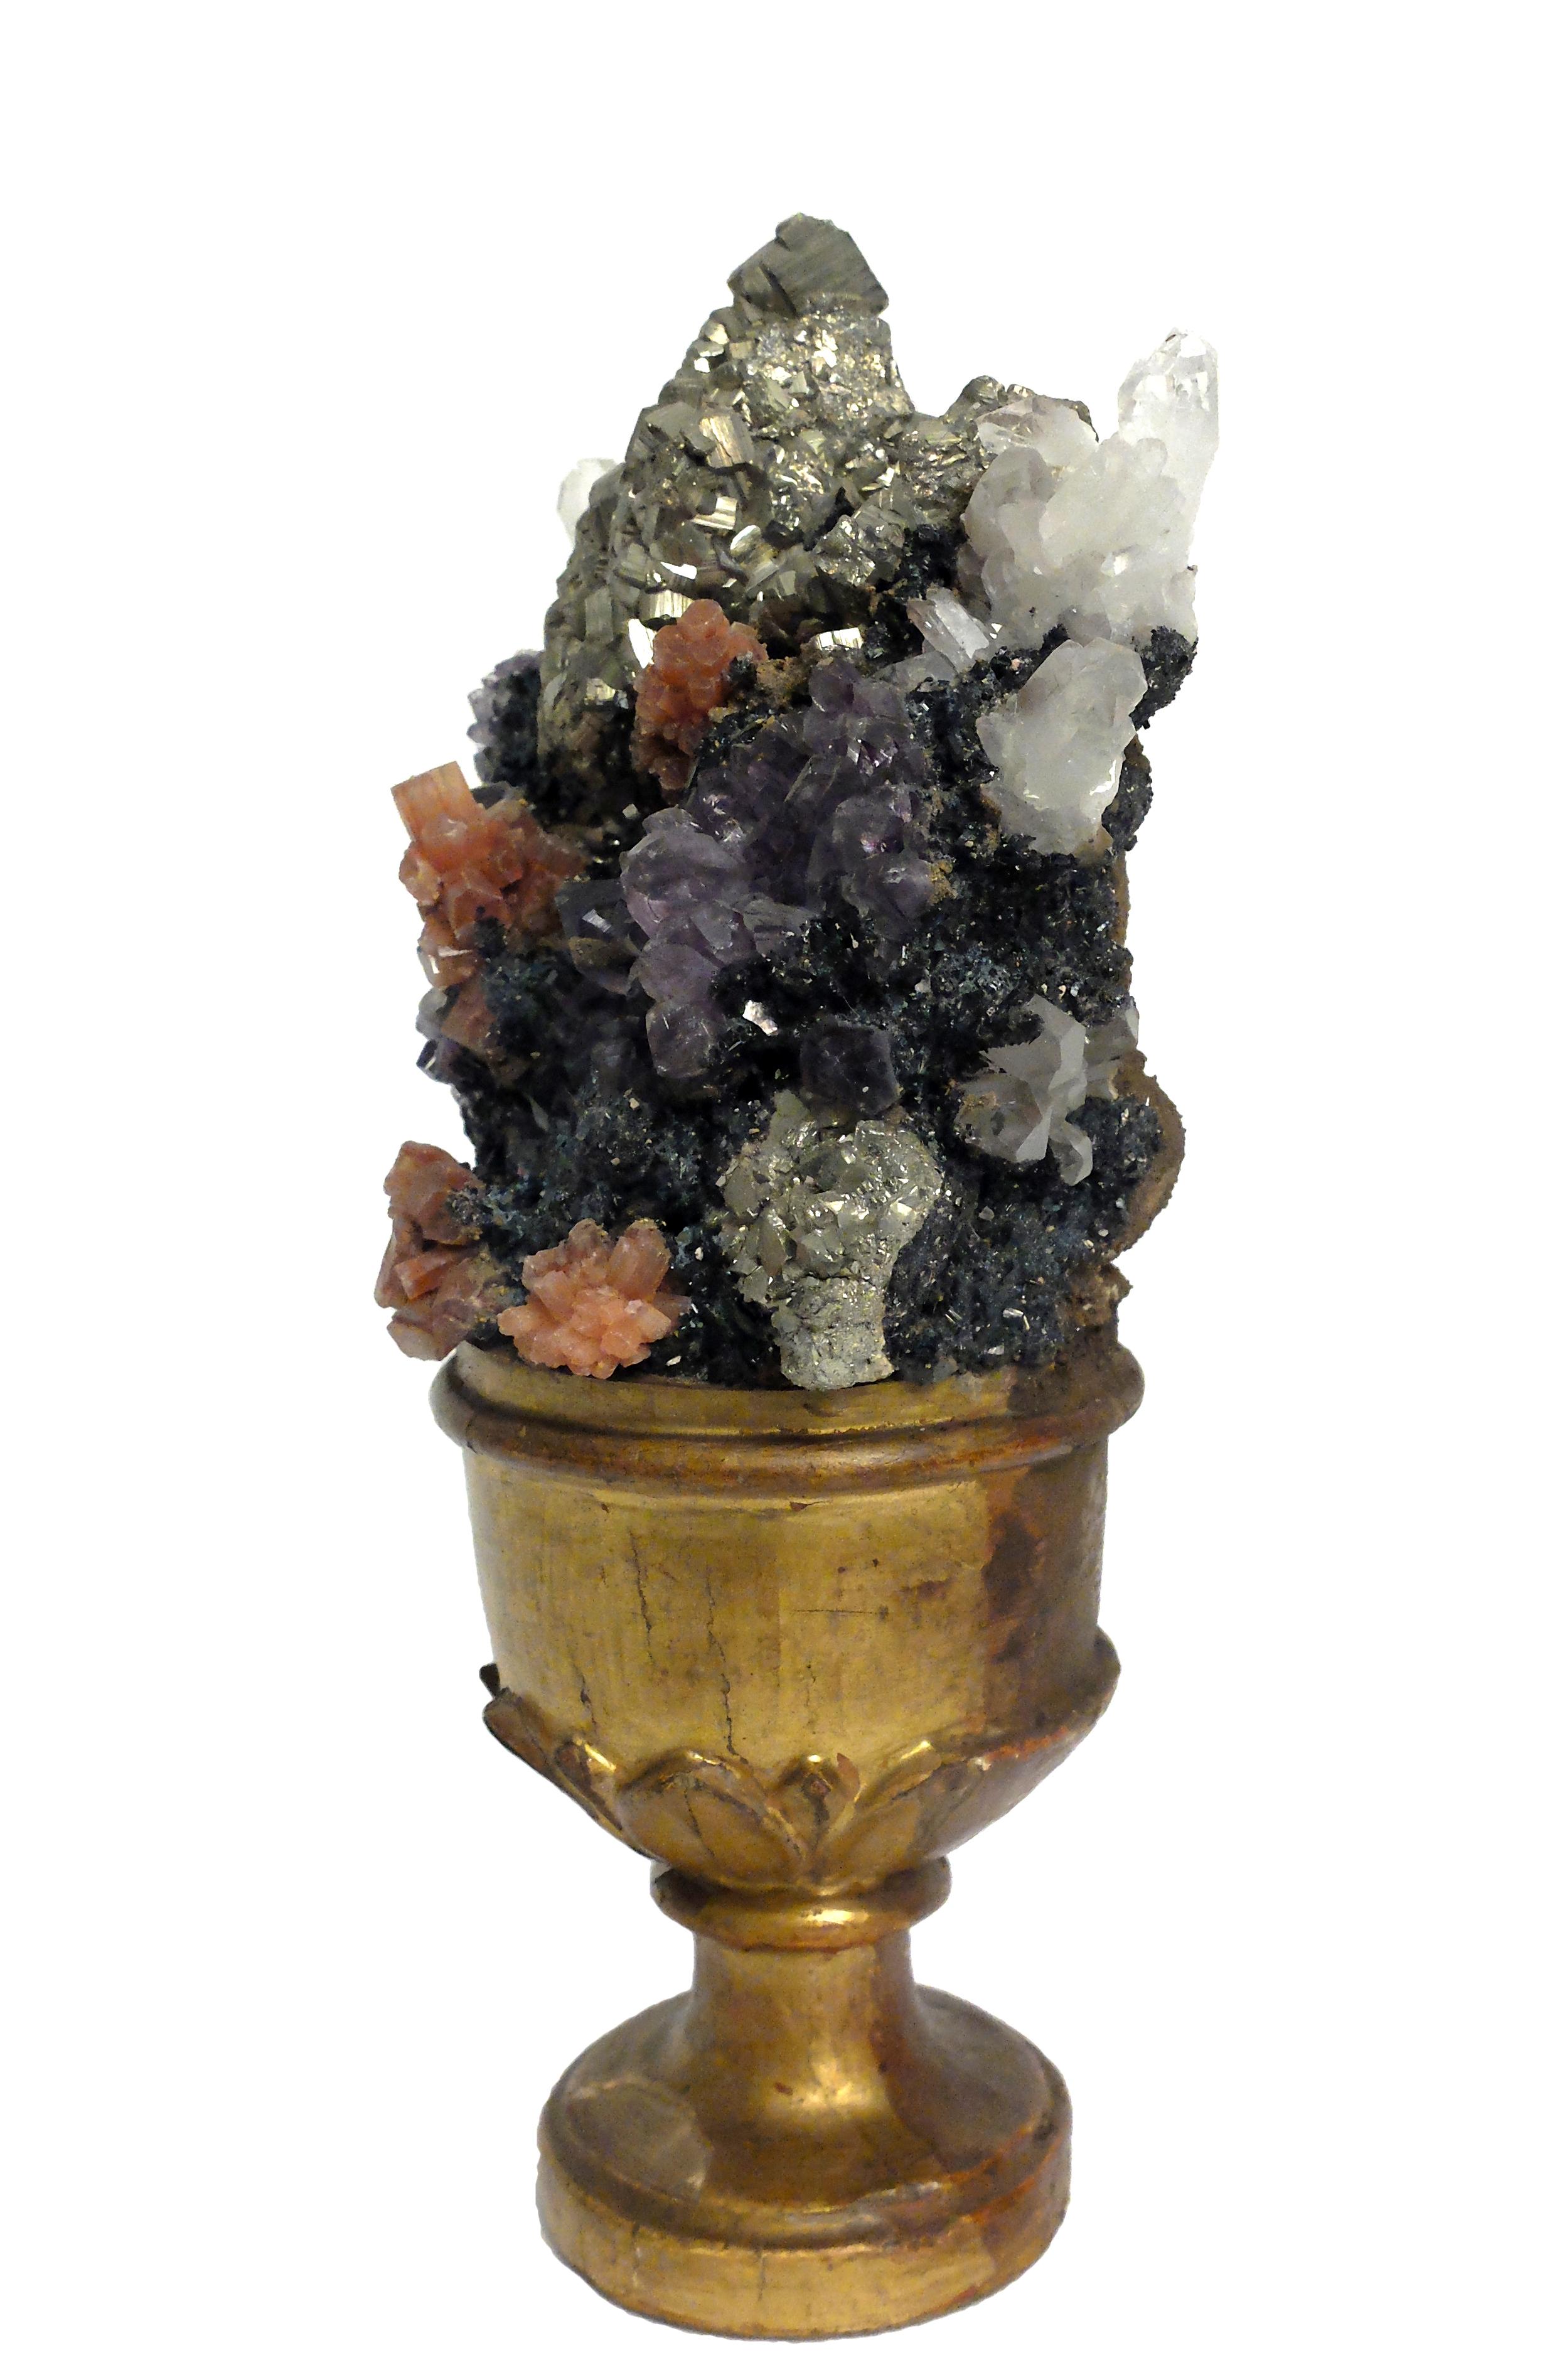 A Naturalia mineral specimen: A composition with Rock crystal, amethist, aragonite and pyrite crystals, mounted over a guild plated wooden base on a vase shape, decorated with leaves.